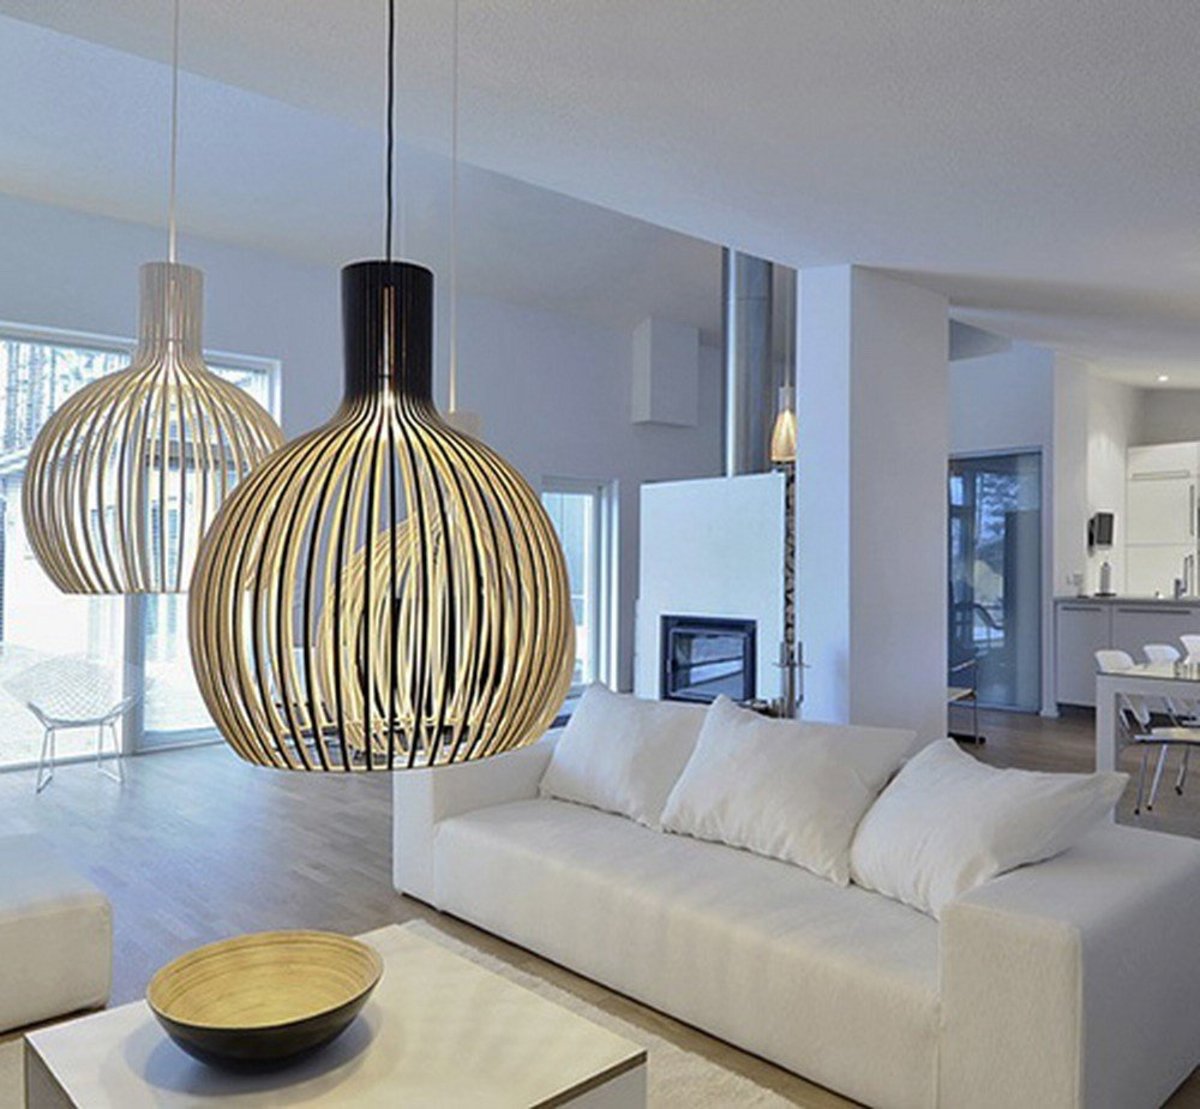 Large pendants over a coffee table add ambient lighting to a seating area.